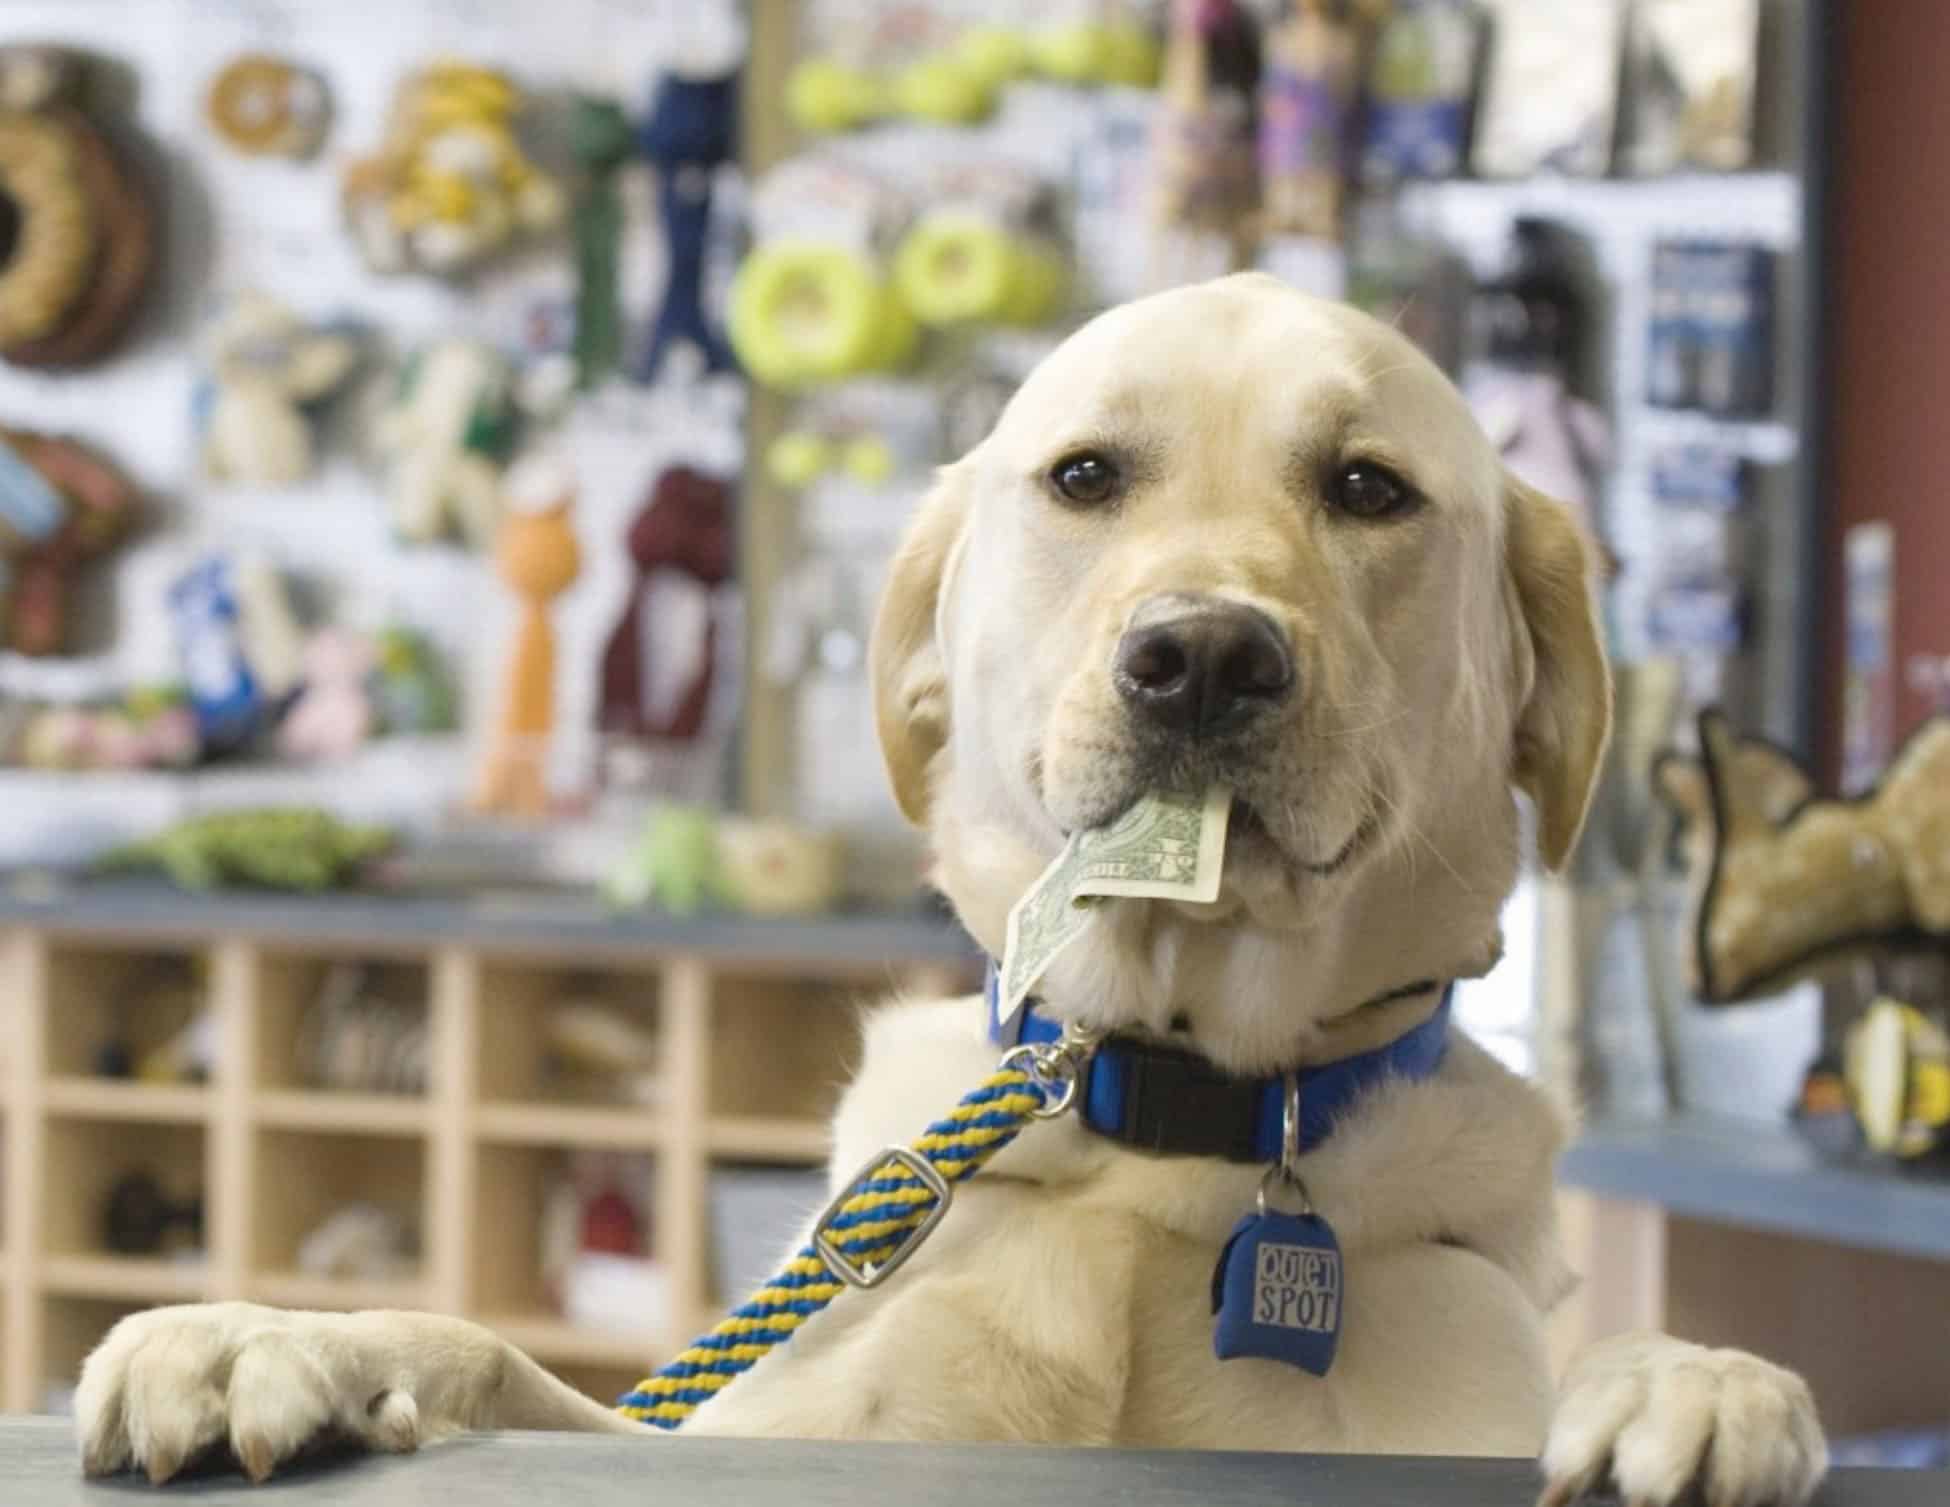 Dog at a counter holding a dollar bill in its mouth